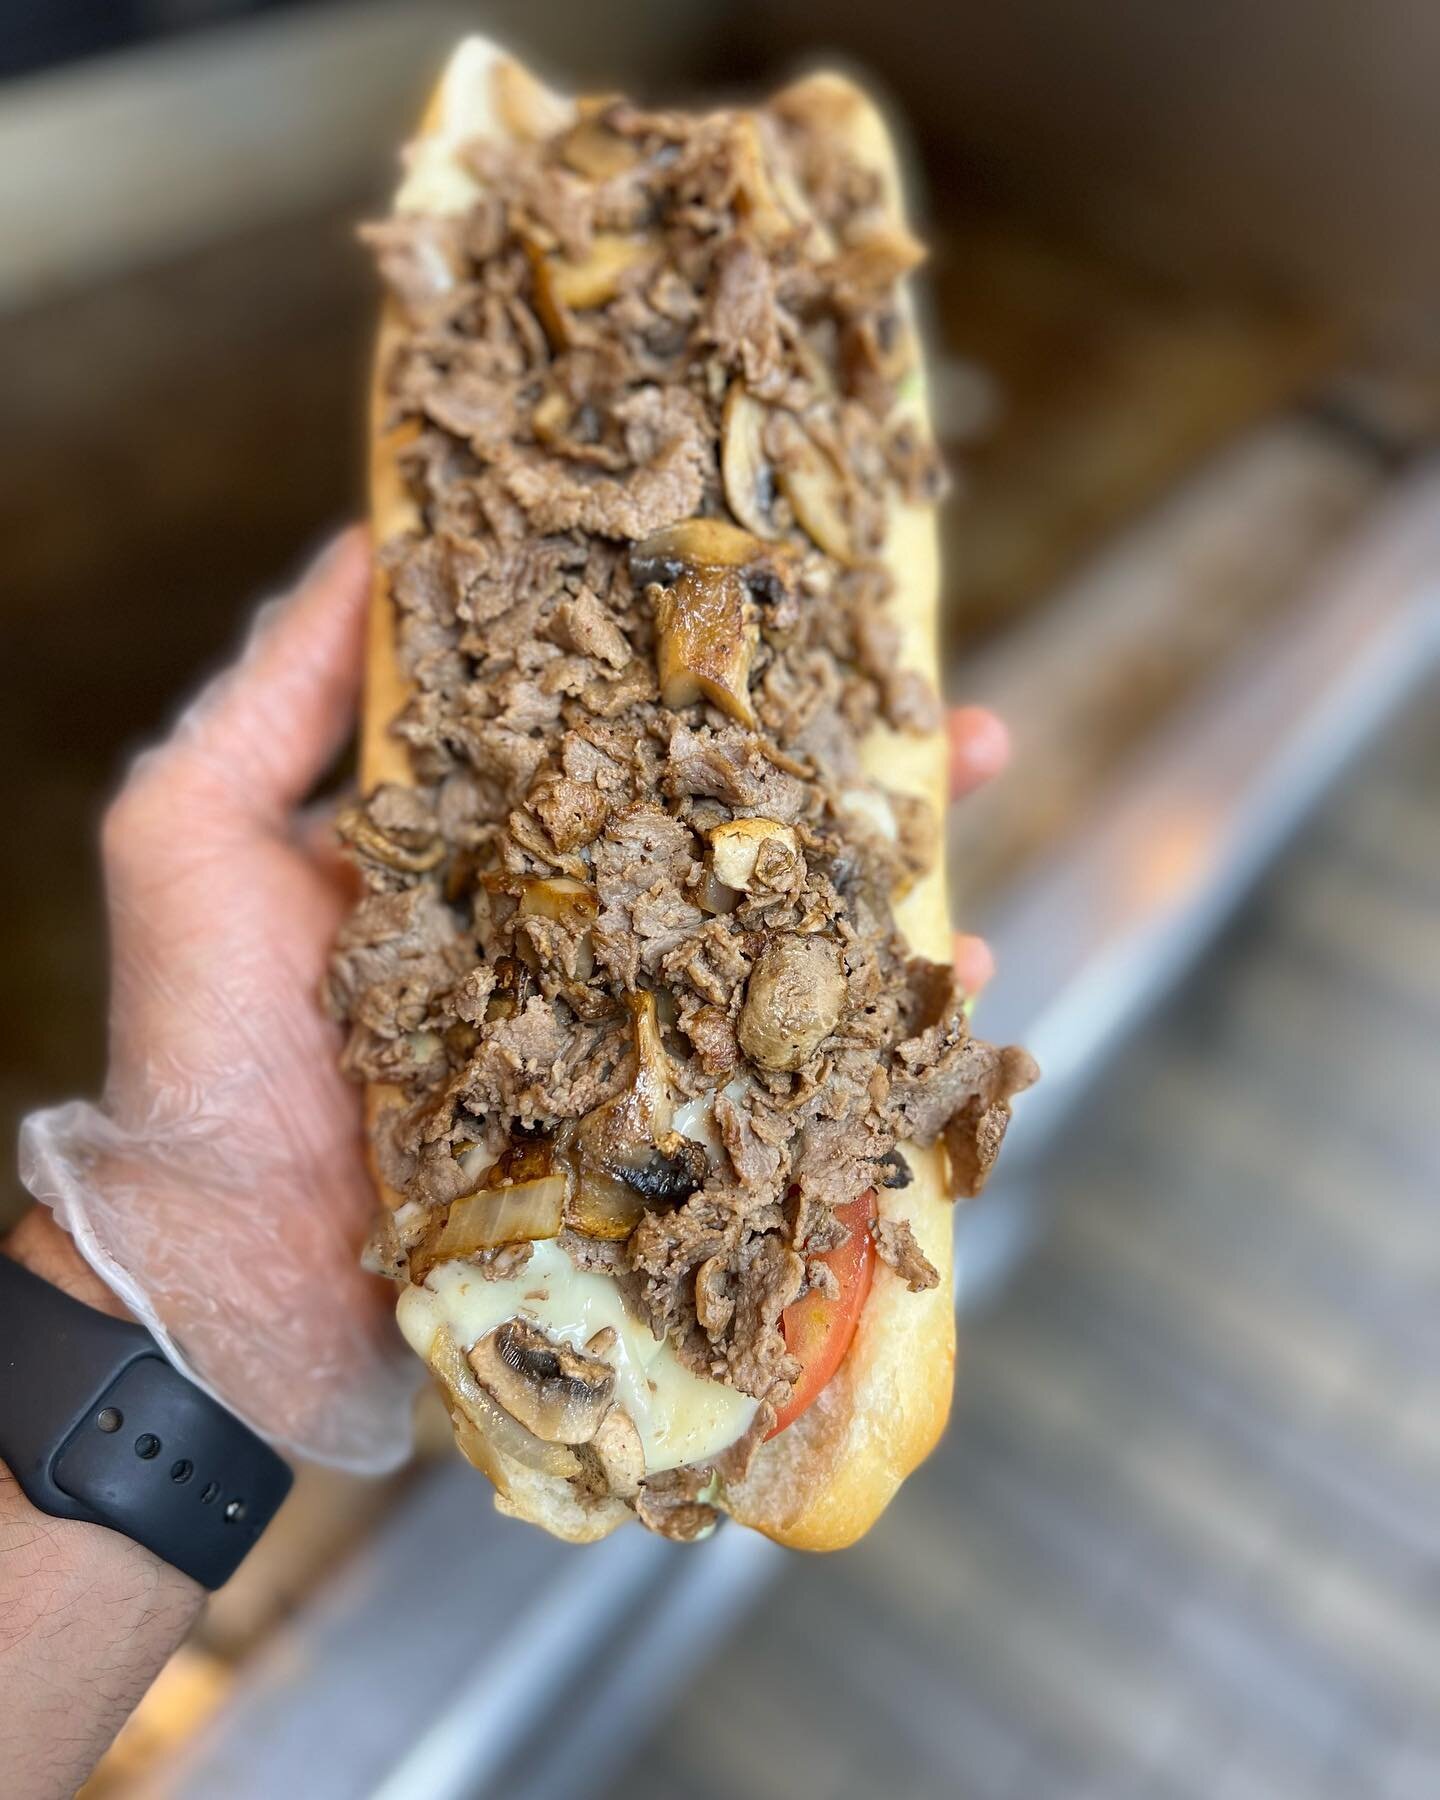 Mushroom cheesesteak 🥖 🥩 🧀 🧅🍄🍄👌 #philly#philadelphiafoodie
#phillypizza #phillyfoodforeal #phillyfoodblogger #philadelphiafood #openinphl #phillyfood #bestpizzaphilly #sesamecrustpizza #phillyrestaurants #phillyfoodporn #phillyfoodies #phillyf